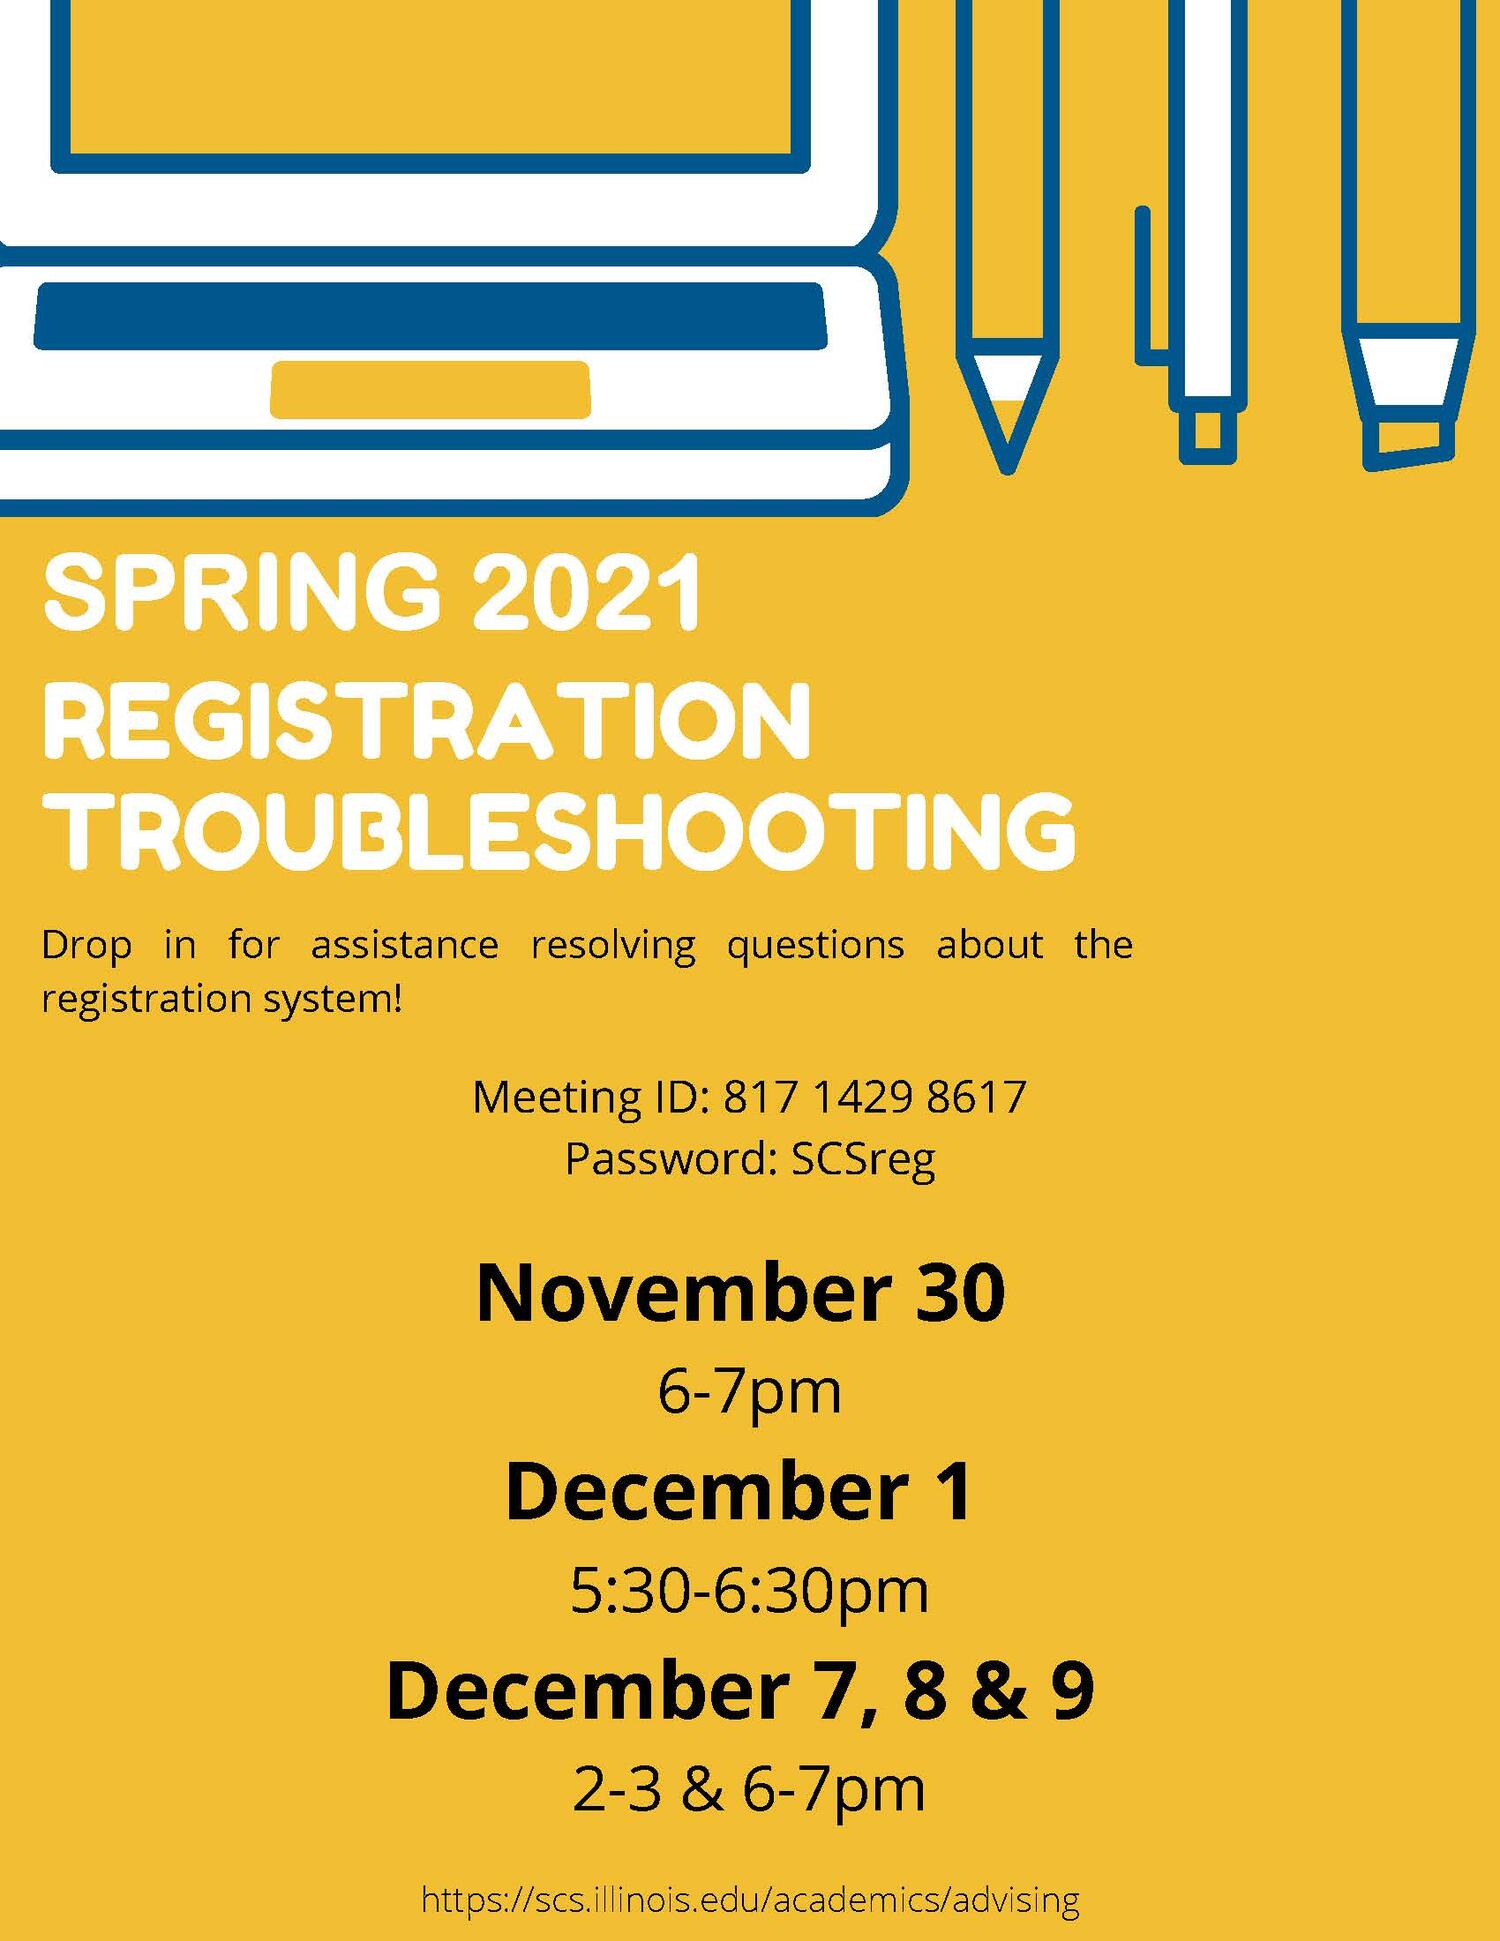 November 30 6-7pm December 1 5:30-6:30pm December 7, 8 & 9 2-3 & 6-7pm https://scs.illinois.edu/academics/advising SPRING 2021 REGISTRATION TROUBLESHOOTING Drop in for assistance resolving questions about the registration system! Meeting ID: 817 1429 8617 Password: SCSreg